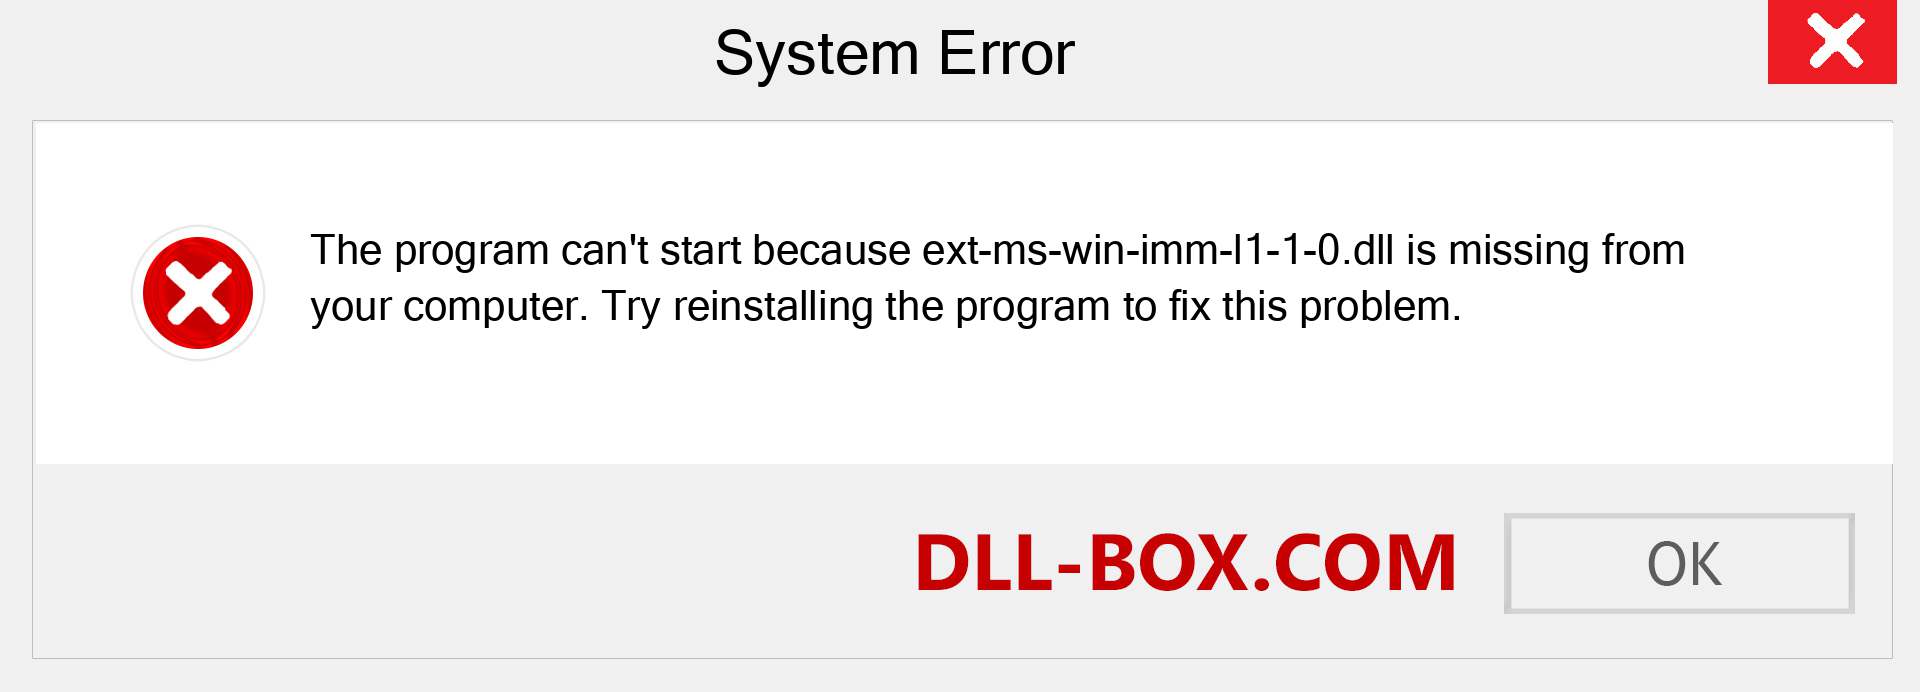  ext-ms-win-imm-l1-1-0.dll file is missing?. Download for Windows 7, 8, 10 - Fix  ext-ms-win-imm-l1-1-0 dll Missing Error on Windows, photos, images